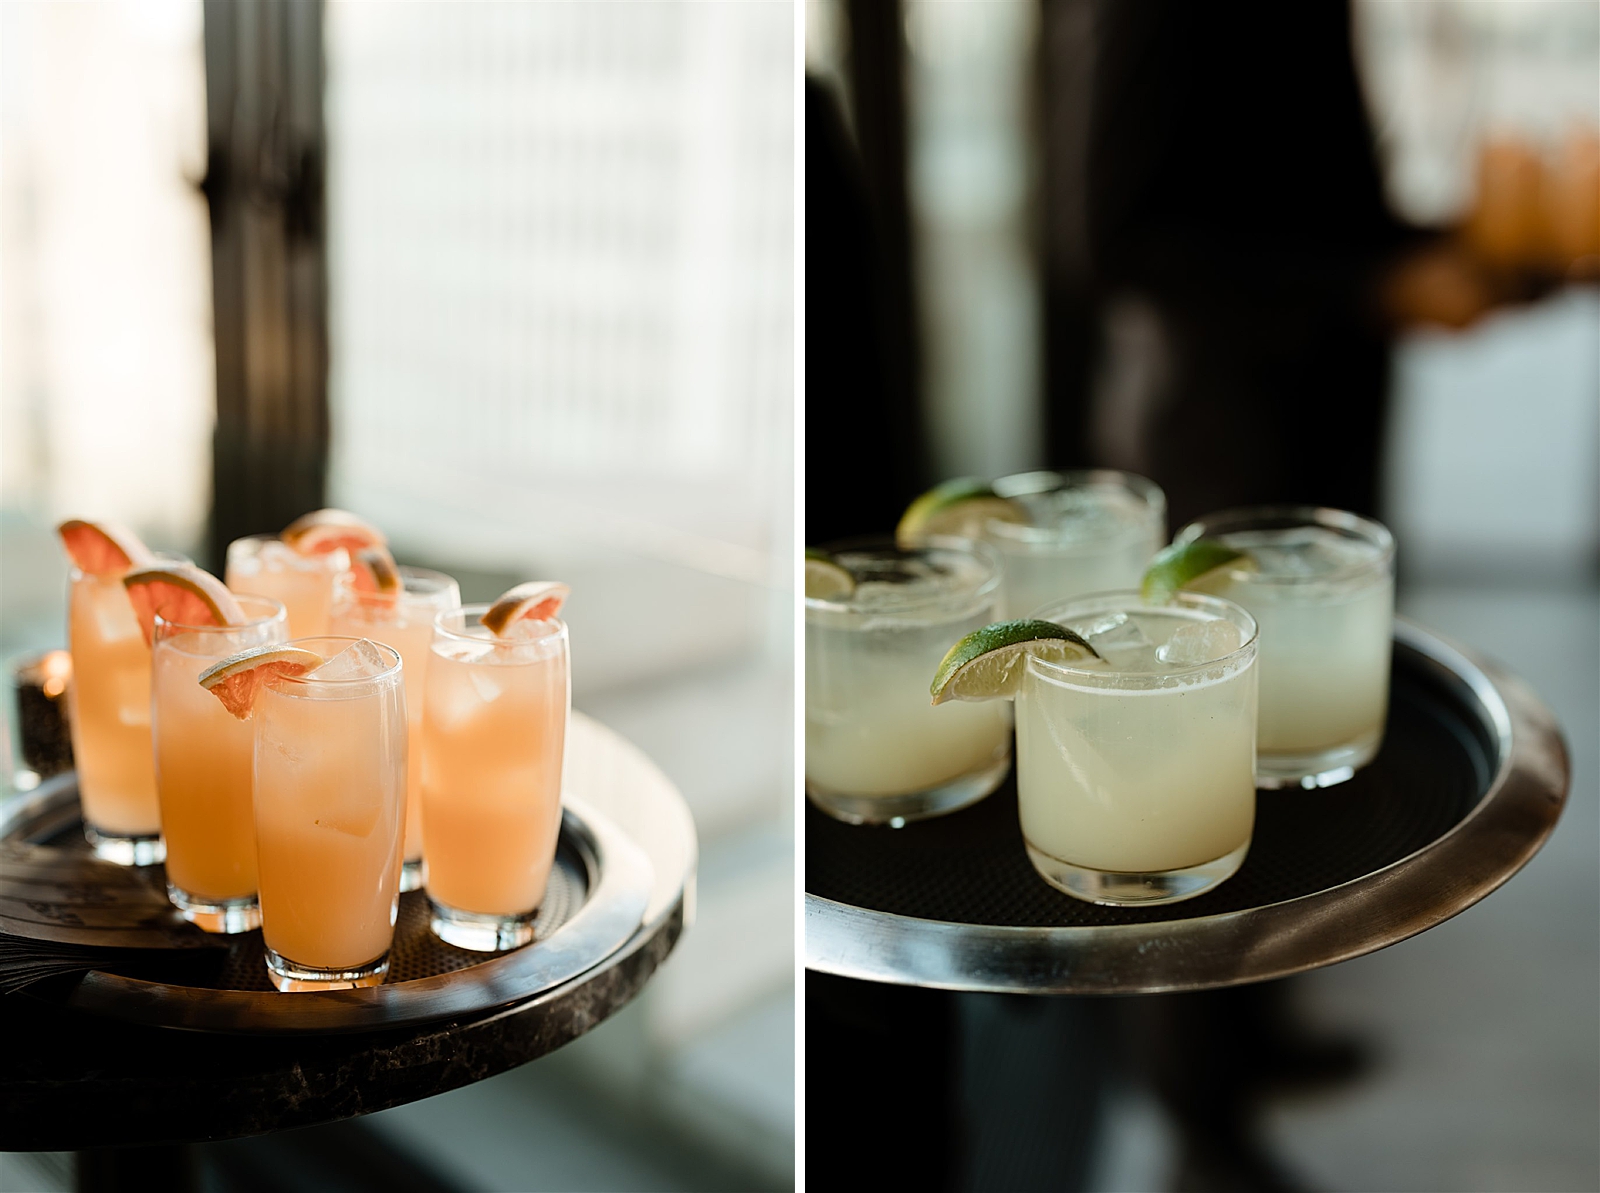 Left photo: Shot of specialty cocktails on a tray.
Right photo: Shot of specialty cocktails on a tray.